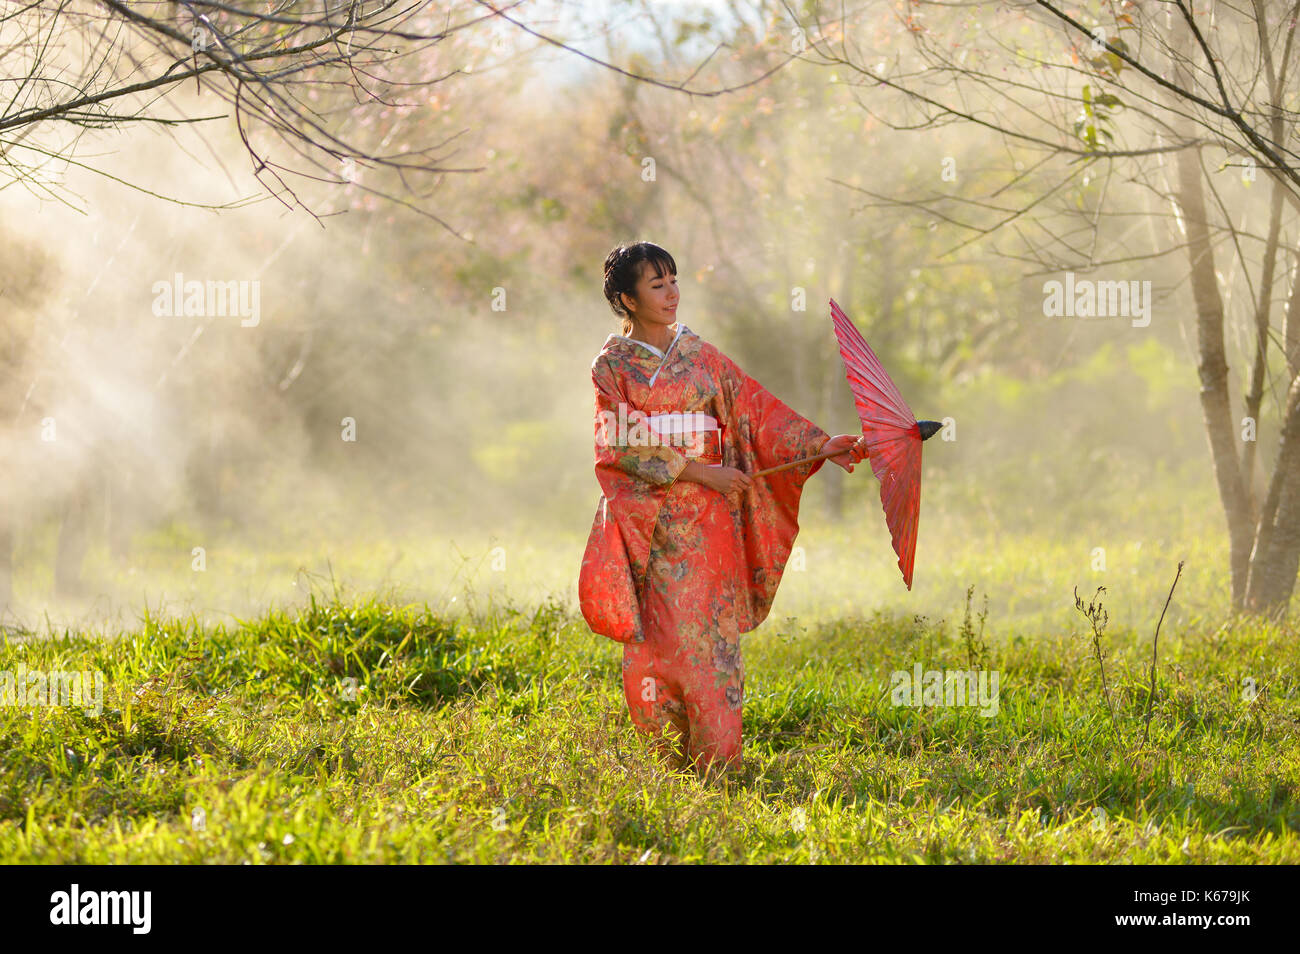 Woman in traditional Japanese clothing in a cherry blossom orchard, Japan Stock Photo